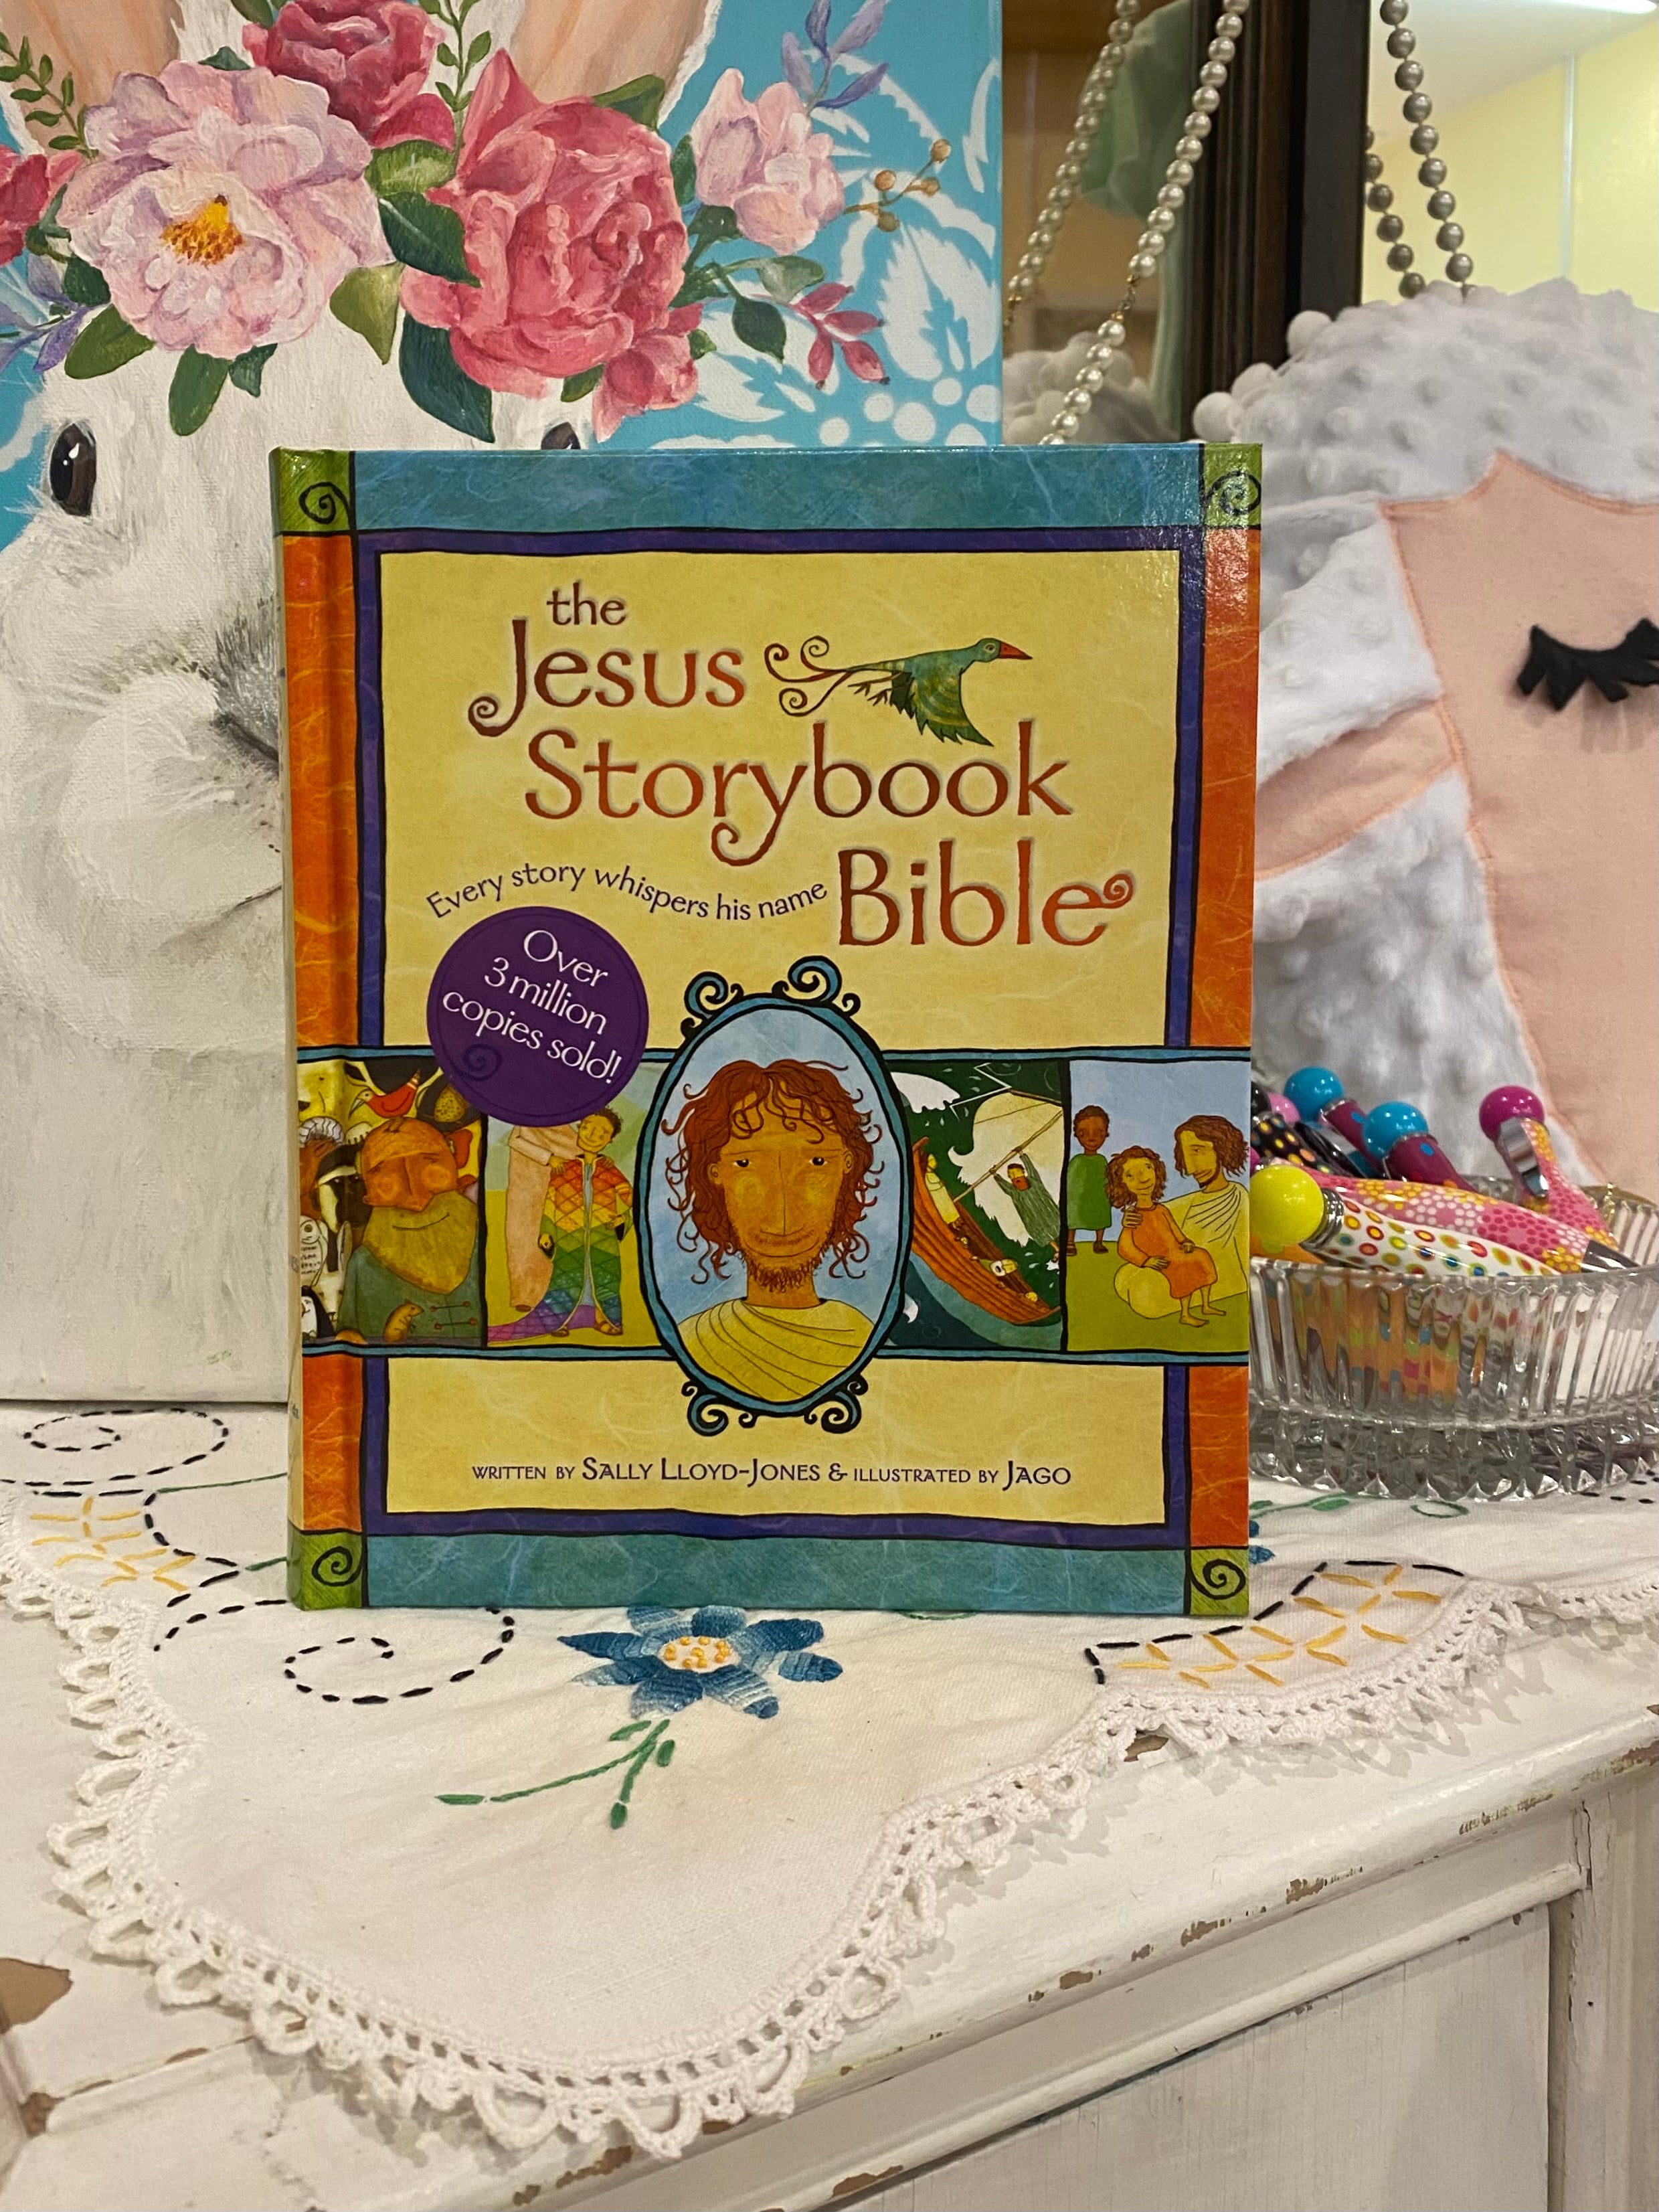 Name　Messenger　Girls　The　Whispers　Bible:　Story　Jesus　His　Storybook　Every